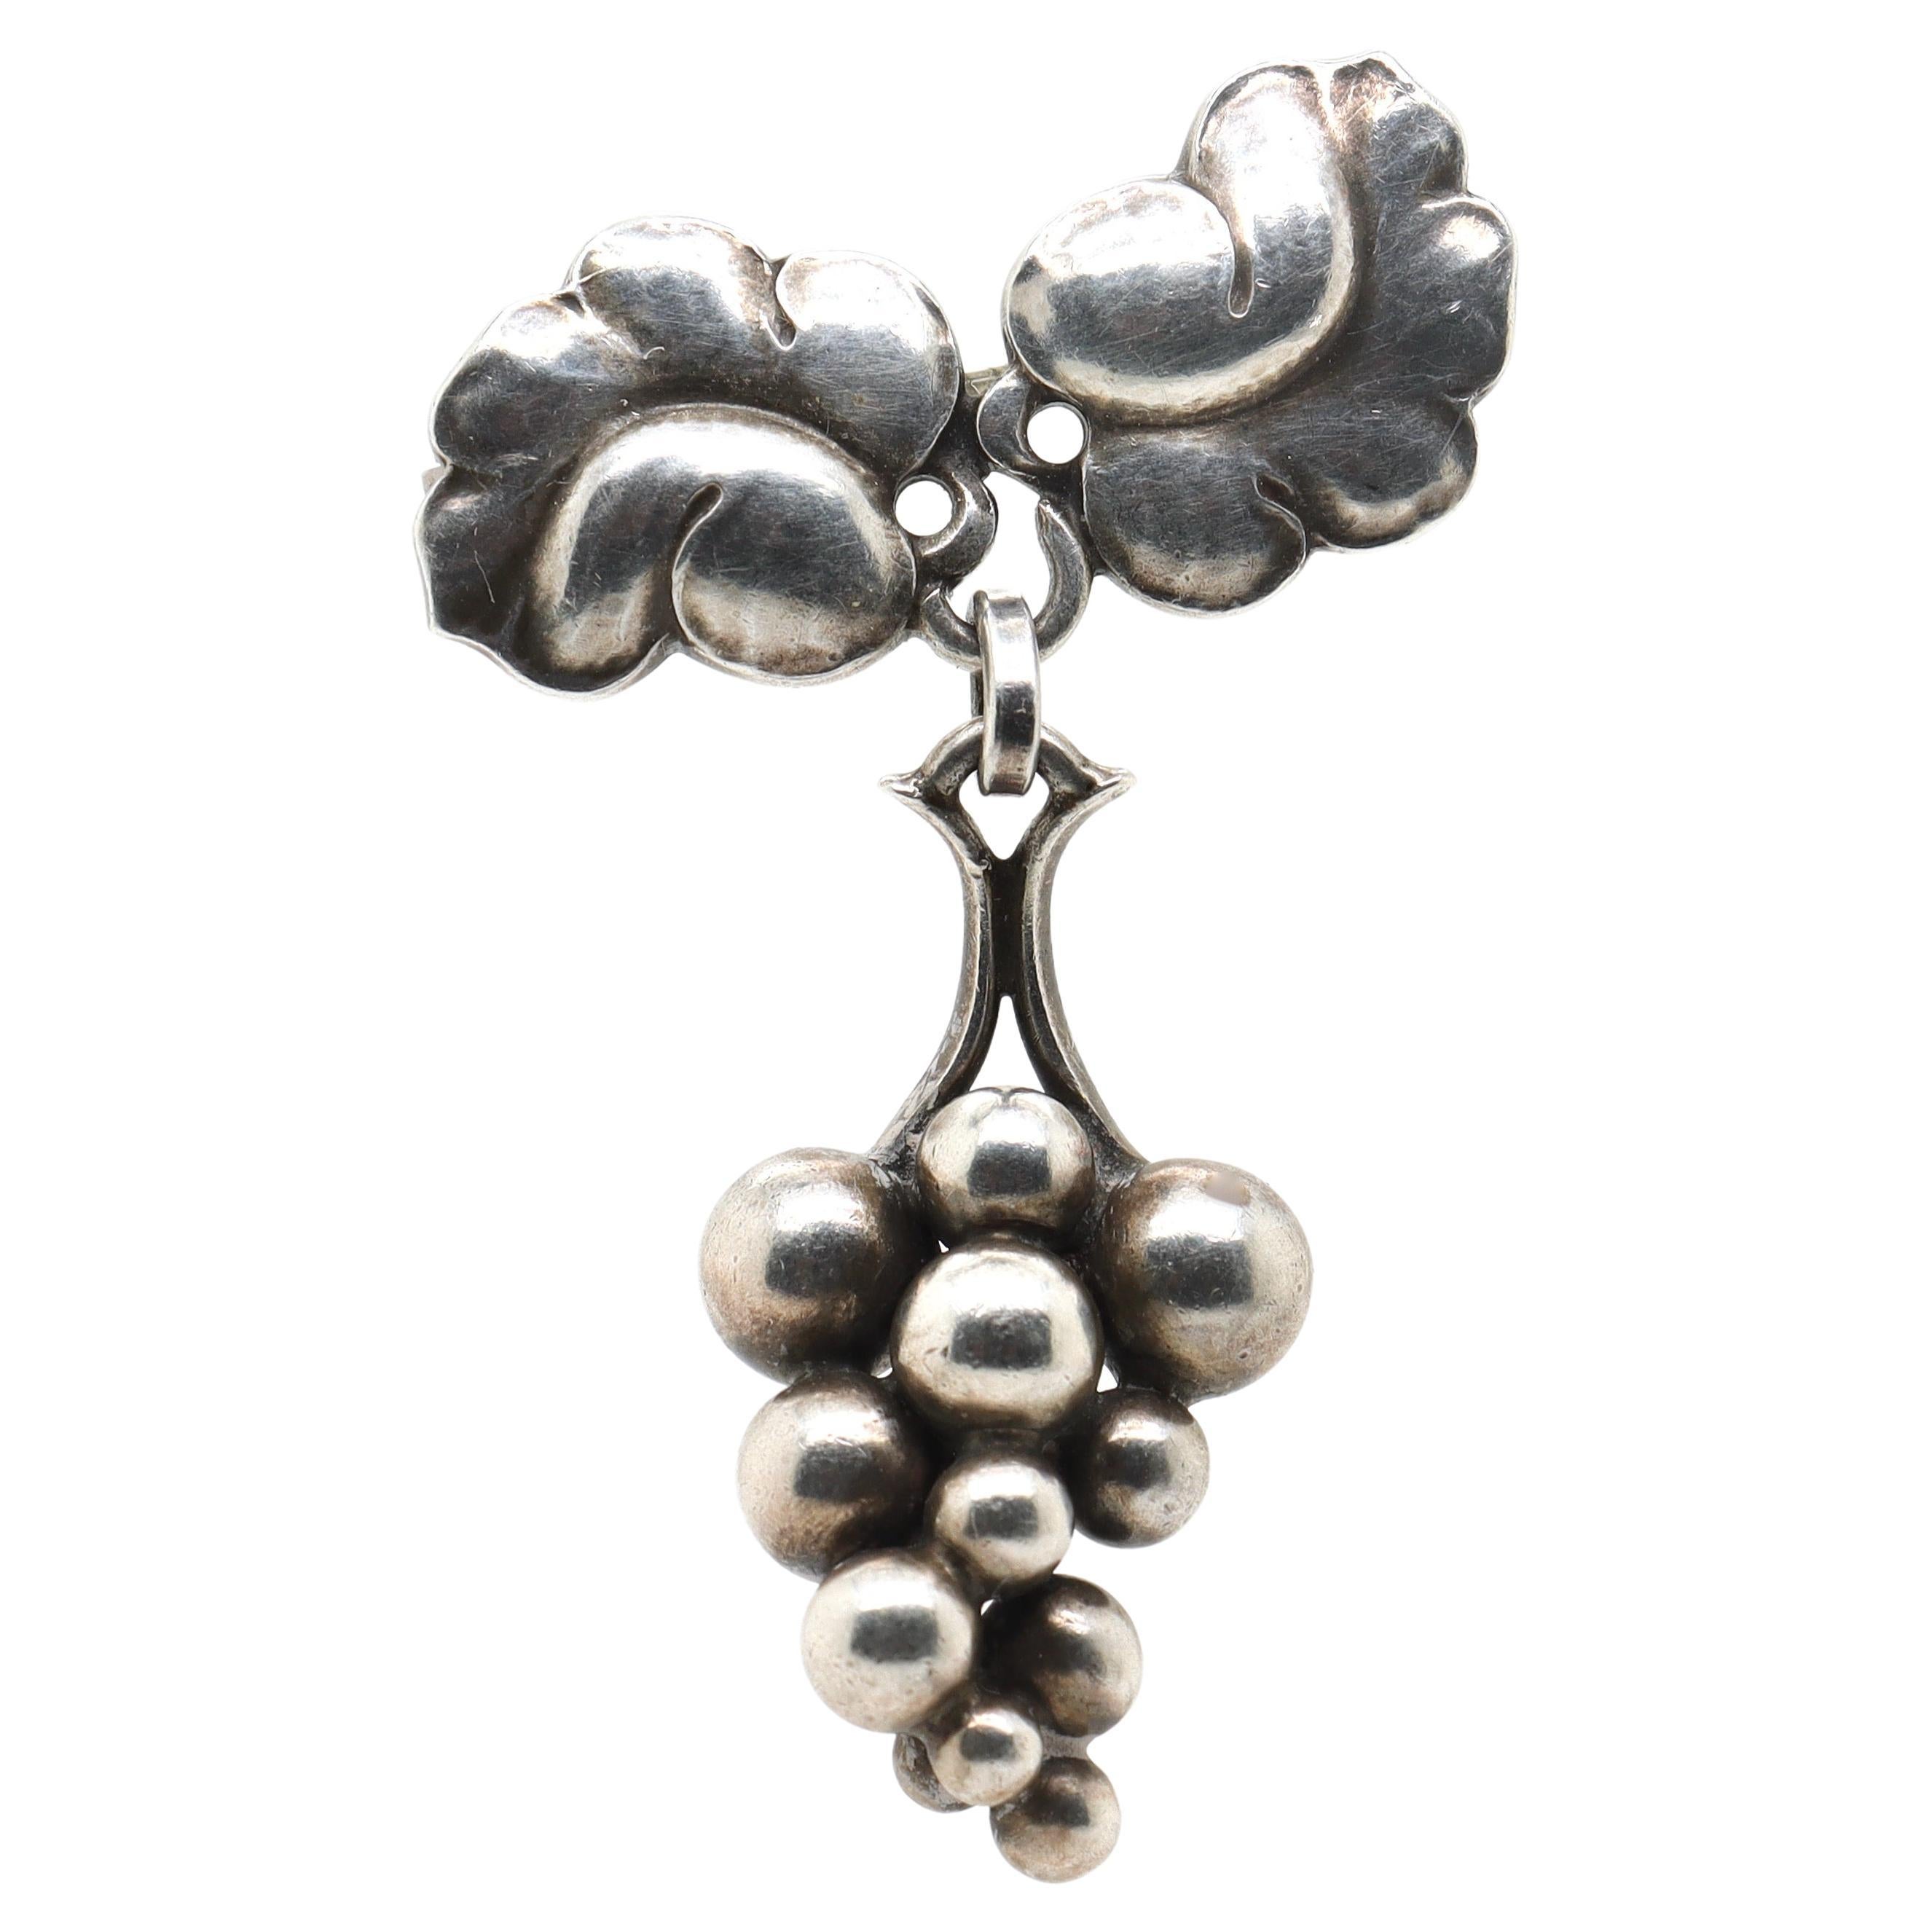 Georg Jensen Sterling Silver "Grapes" Brooch or Pin No. 217A